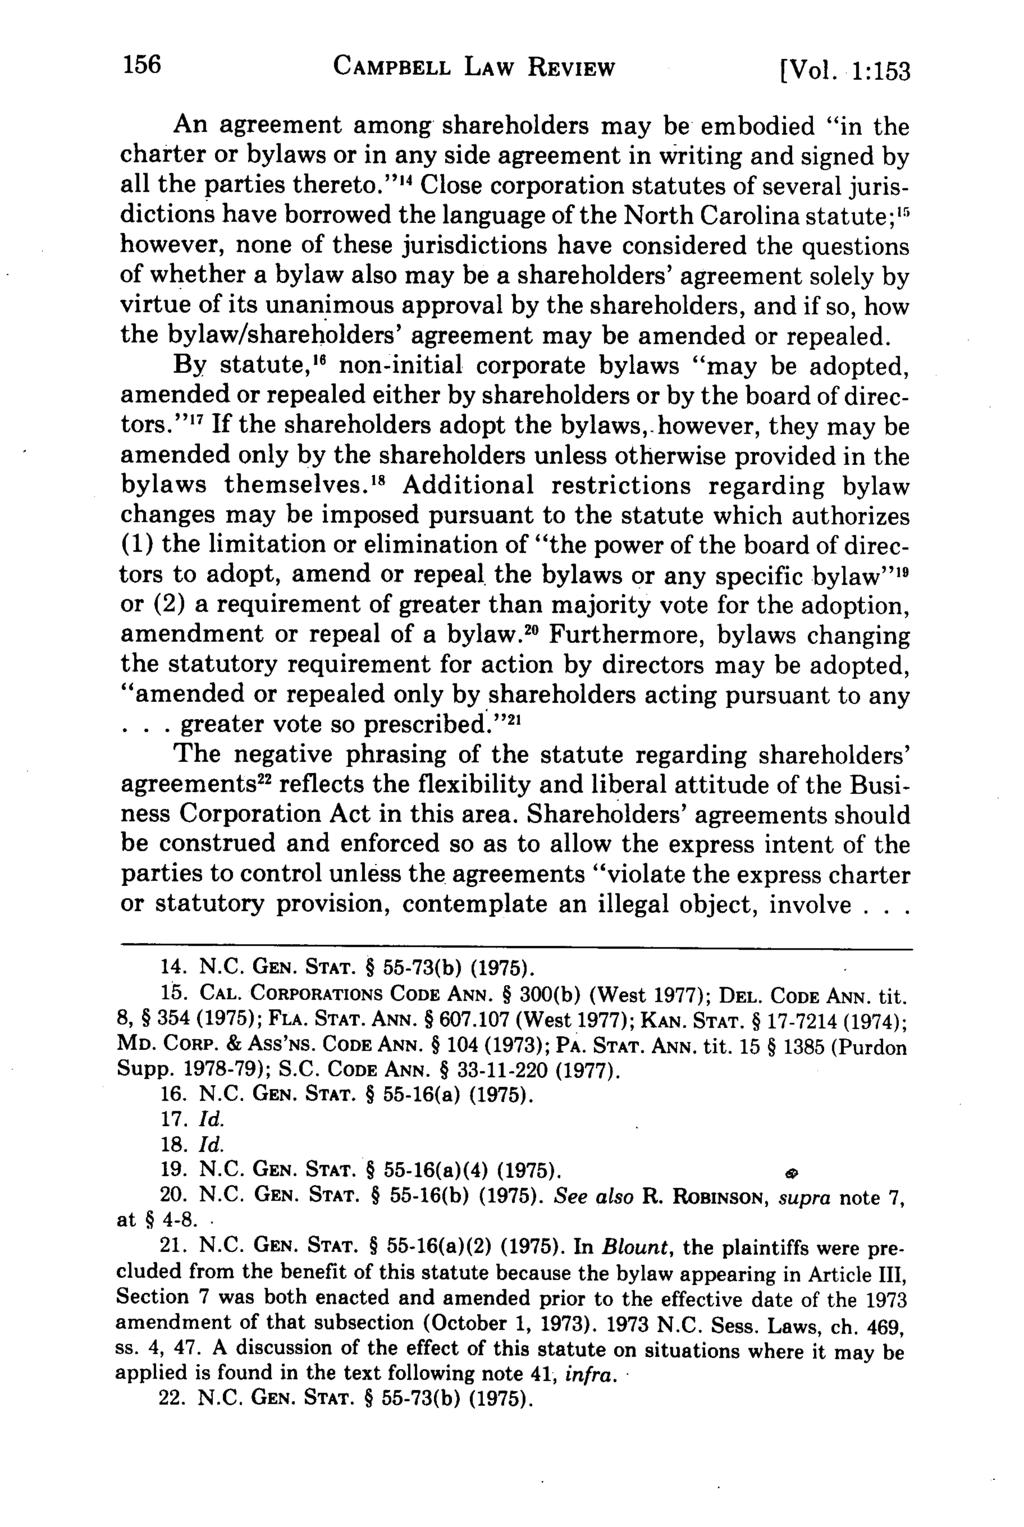 Campbell CAMPBELL Law Review, LAW Vol. 1, Iss. 1 [1979], Art. 7 REVIEW [Vol.